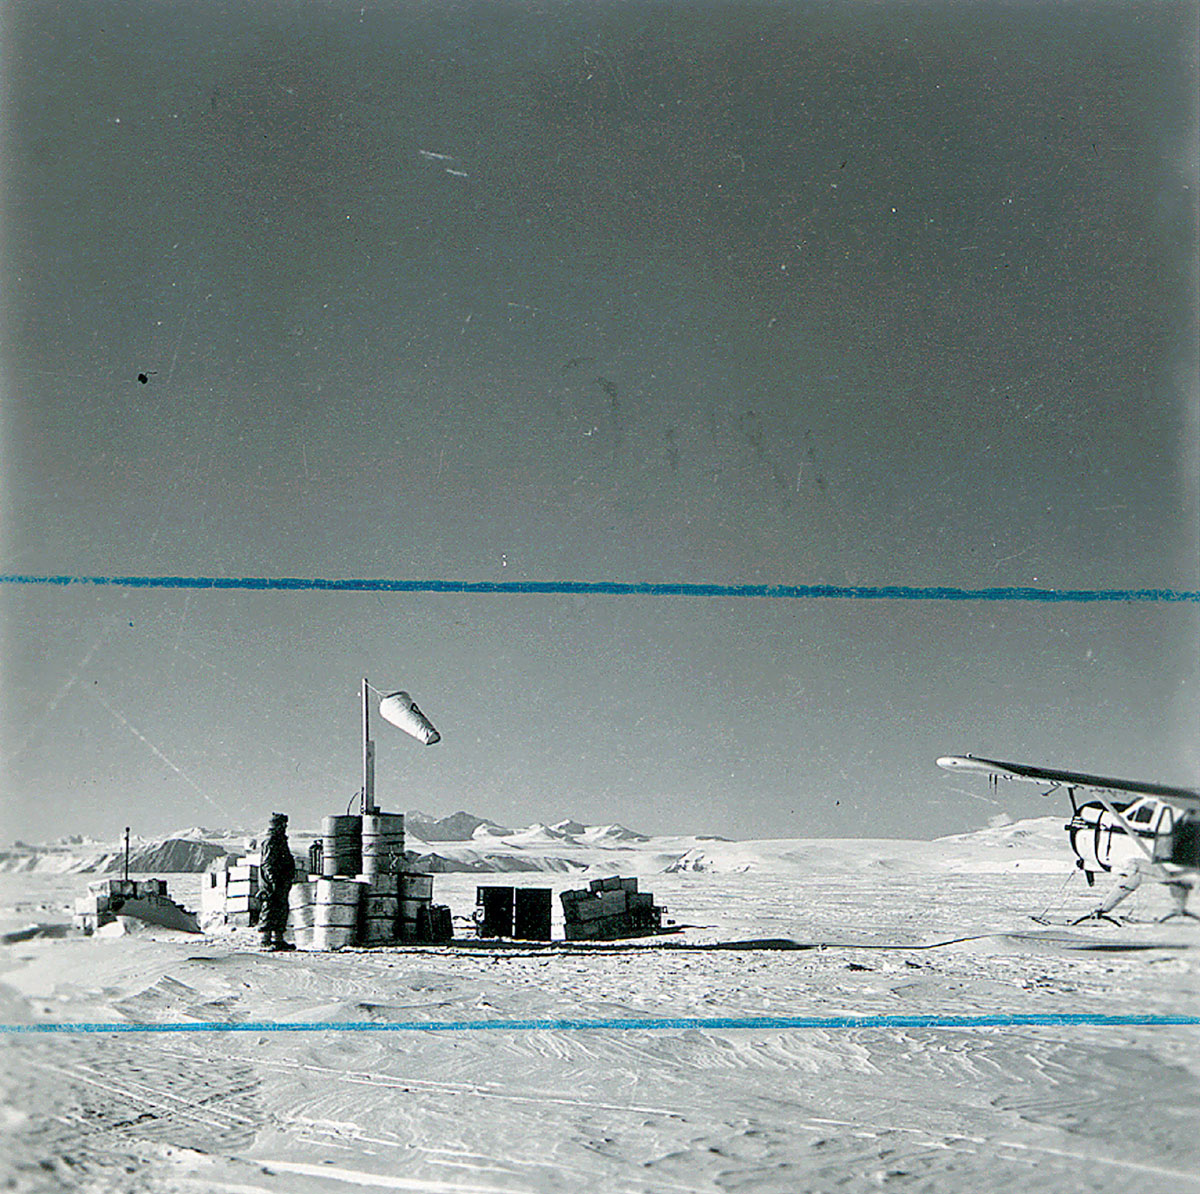 A photograph of an explorer in Antarctica with blue crop marks across the frame.